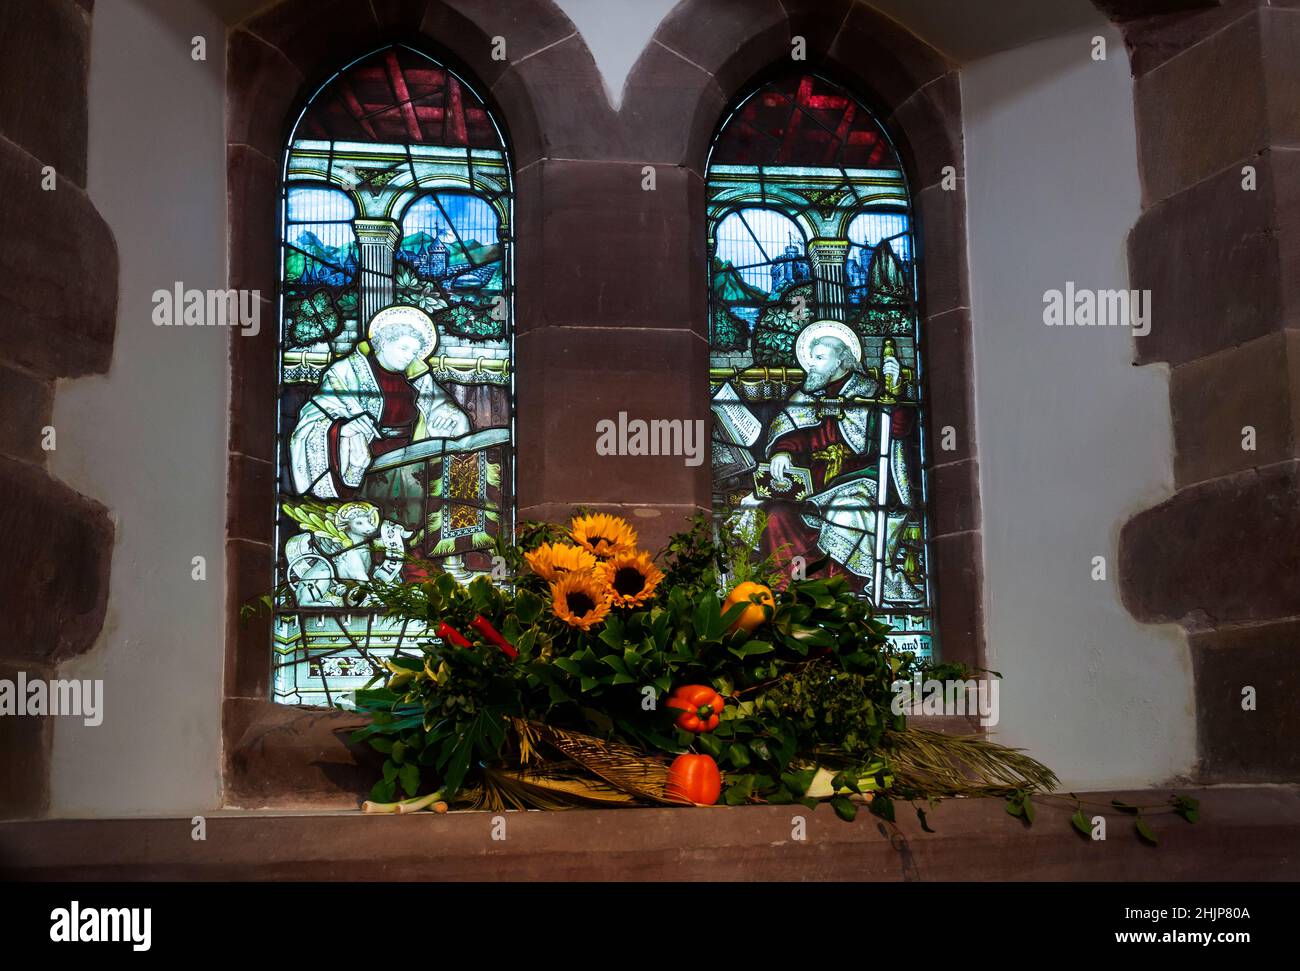 Stained glass window of St Paul and St Luke at St Michael and All Saints Church, Helensburgh, Scotland with arrangement of flowers and fruits. Stock Photo